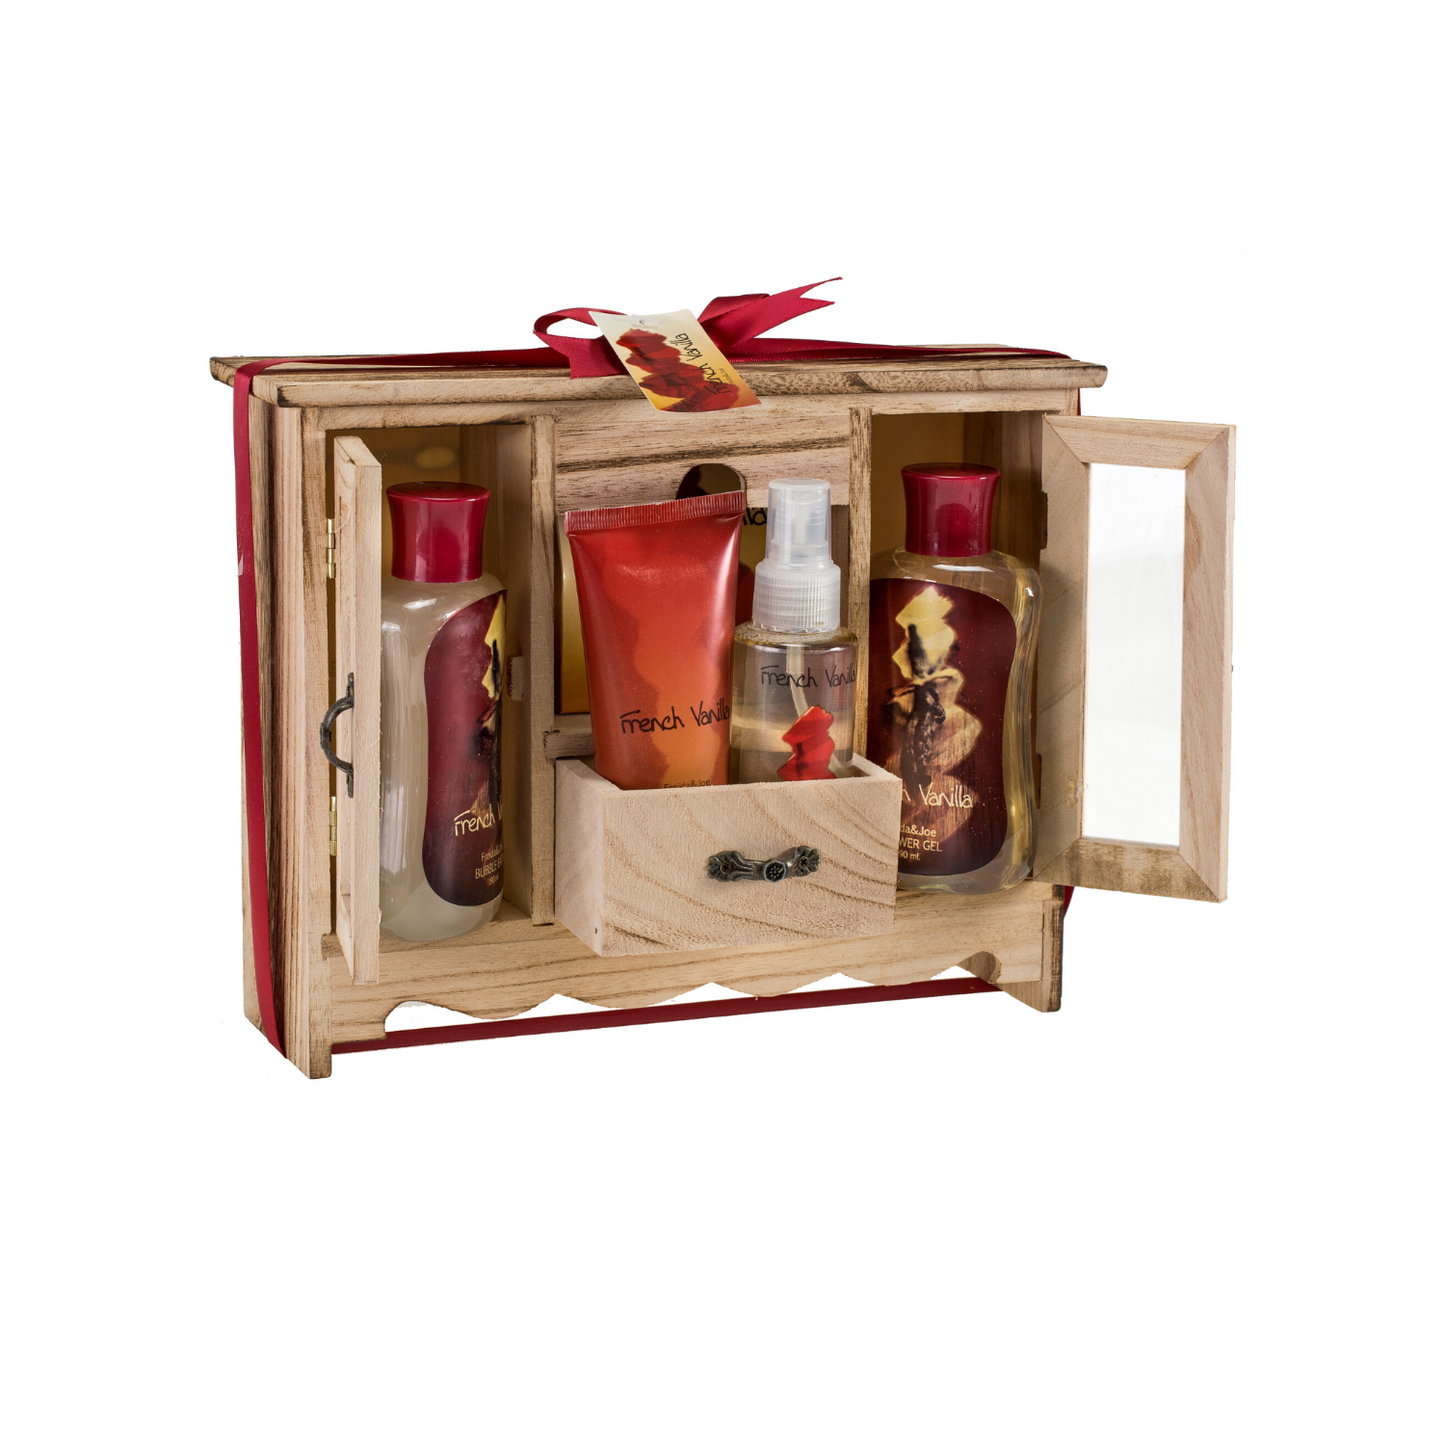 French Vanilla Spa Bath Gift Set in Natural Wood Curio With Refreshing Skin Care Products